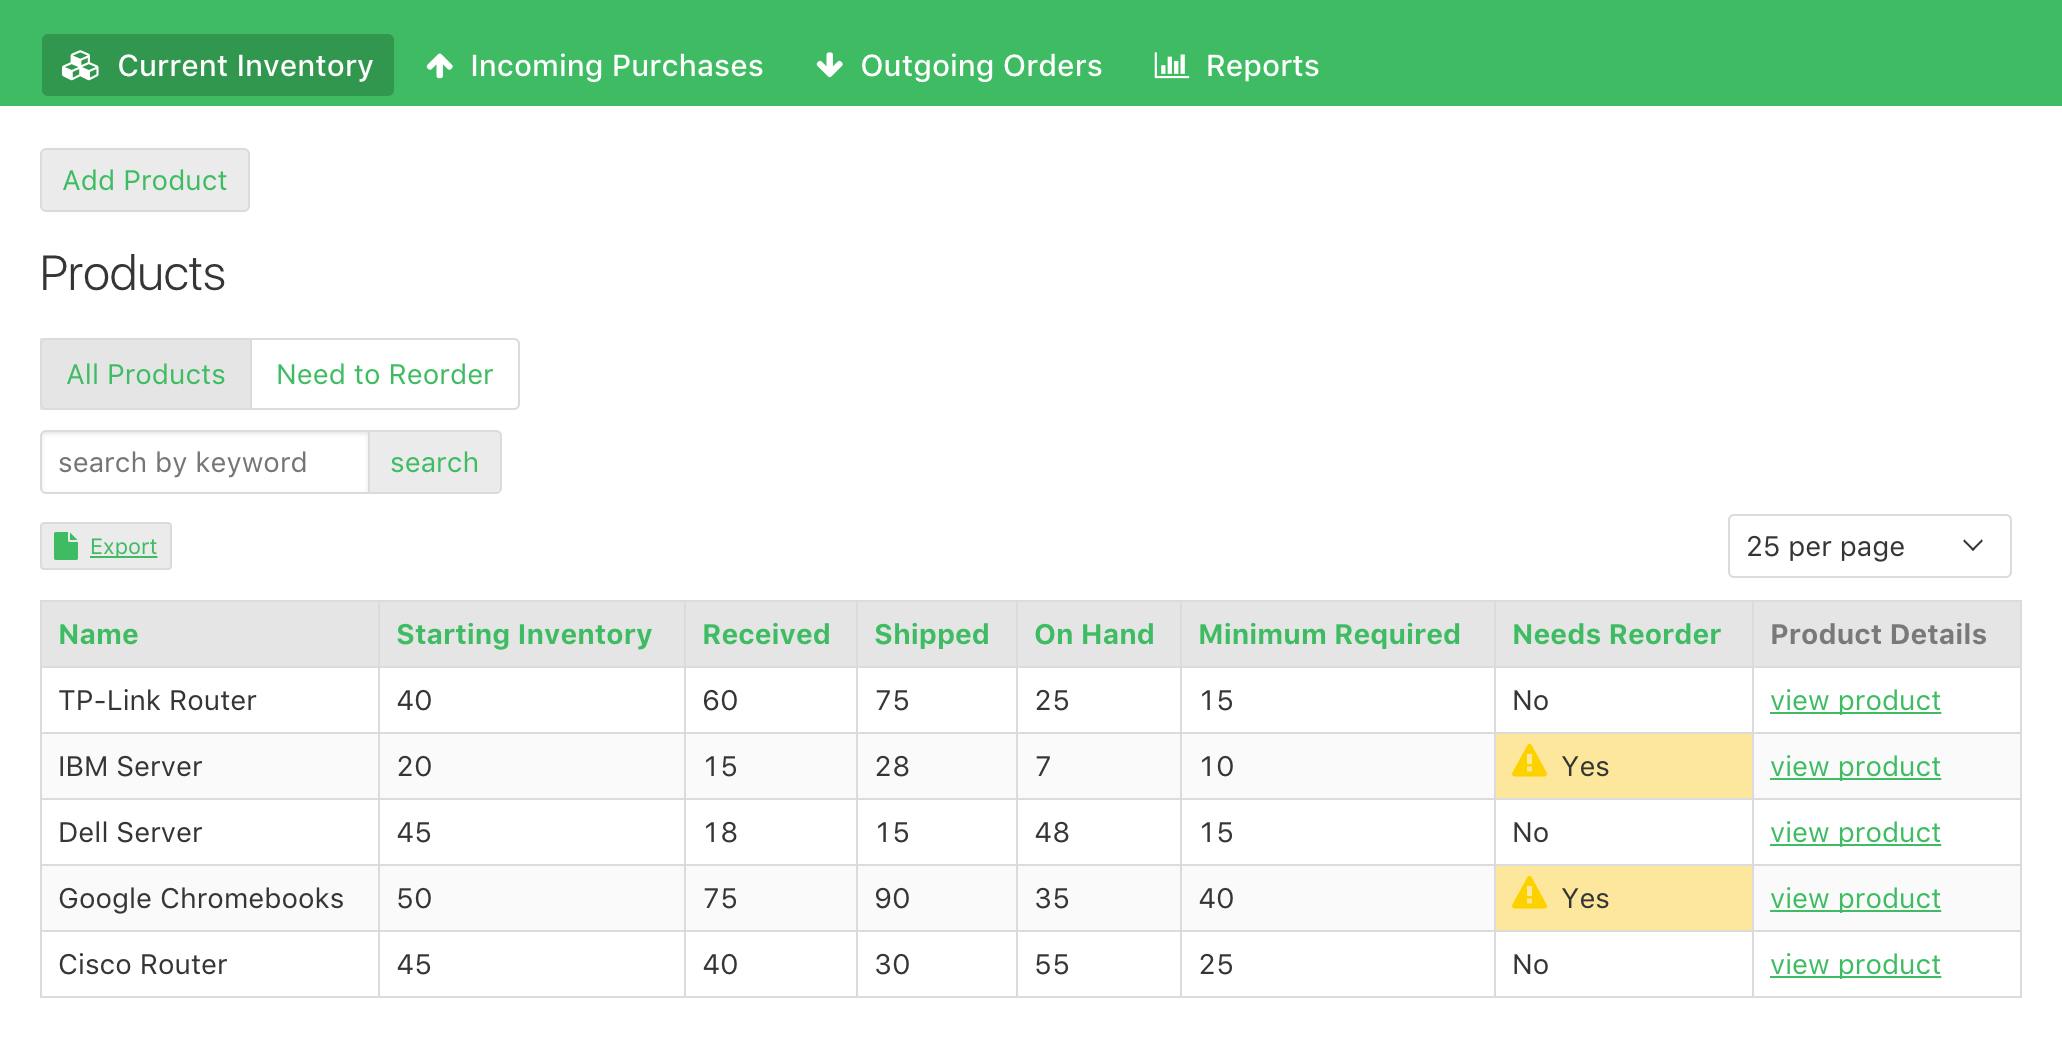 Track inventory for multiple products, including notices when products should be reordered.